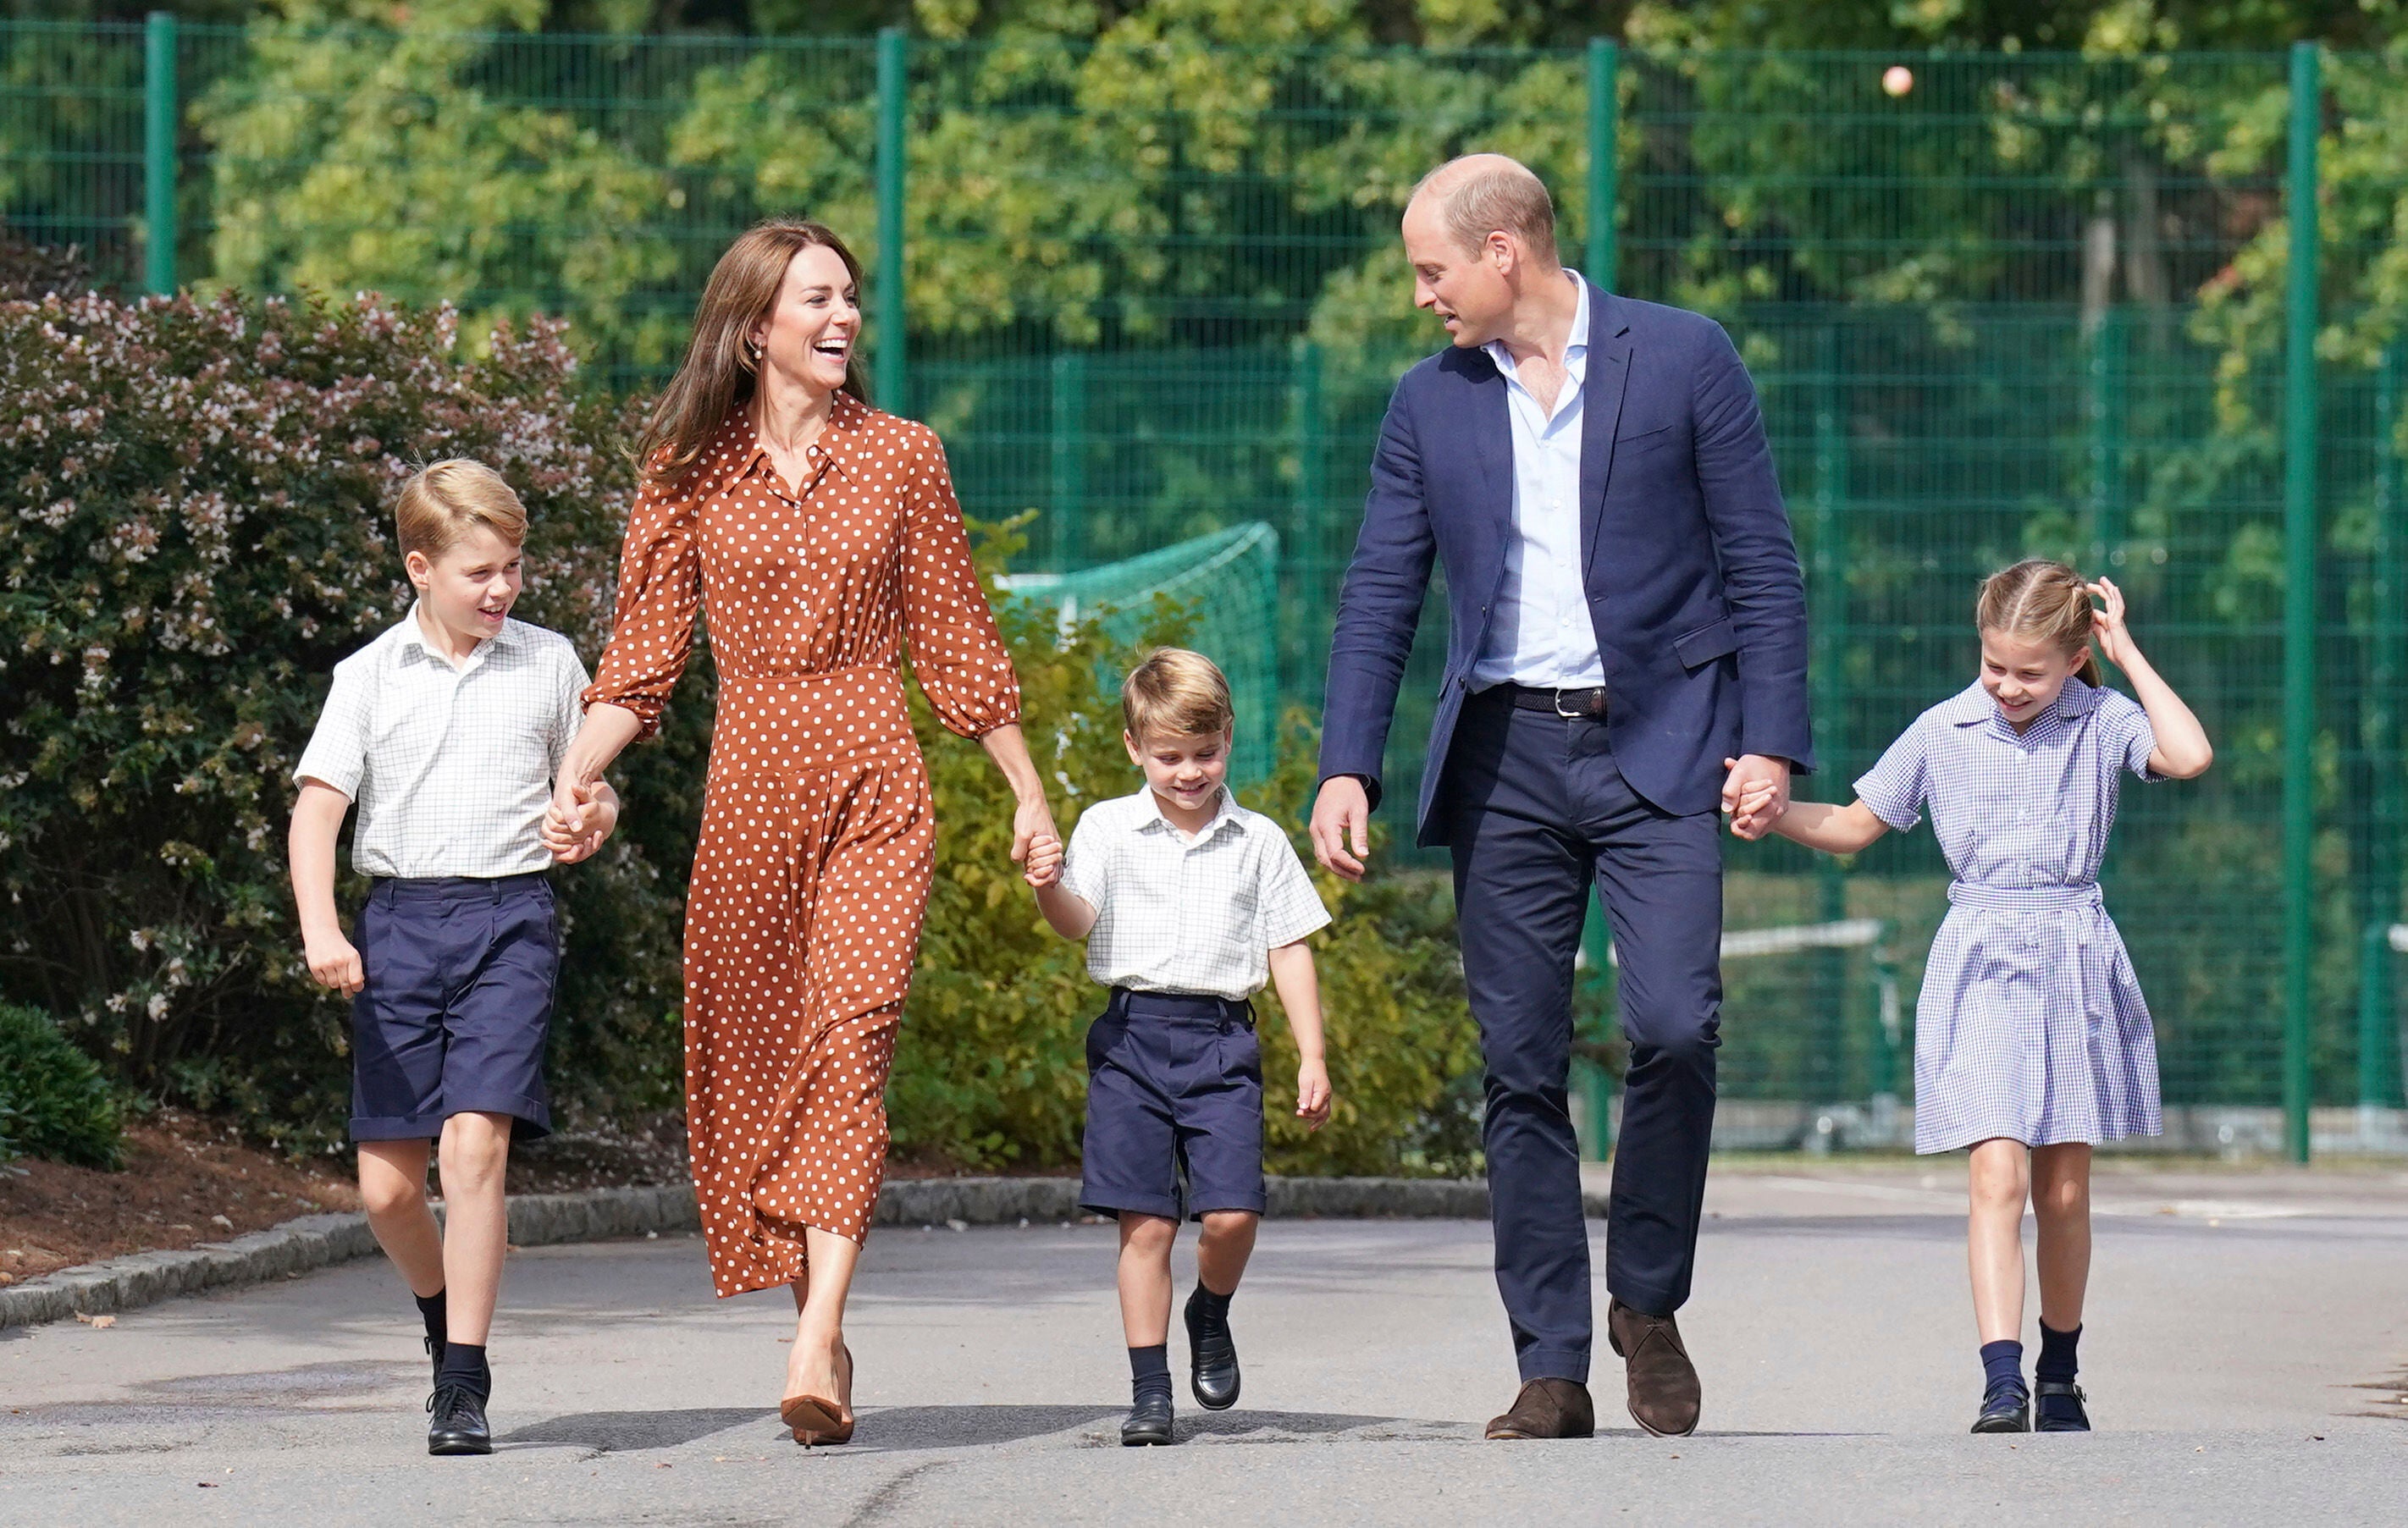 Royal children would be expected to take part